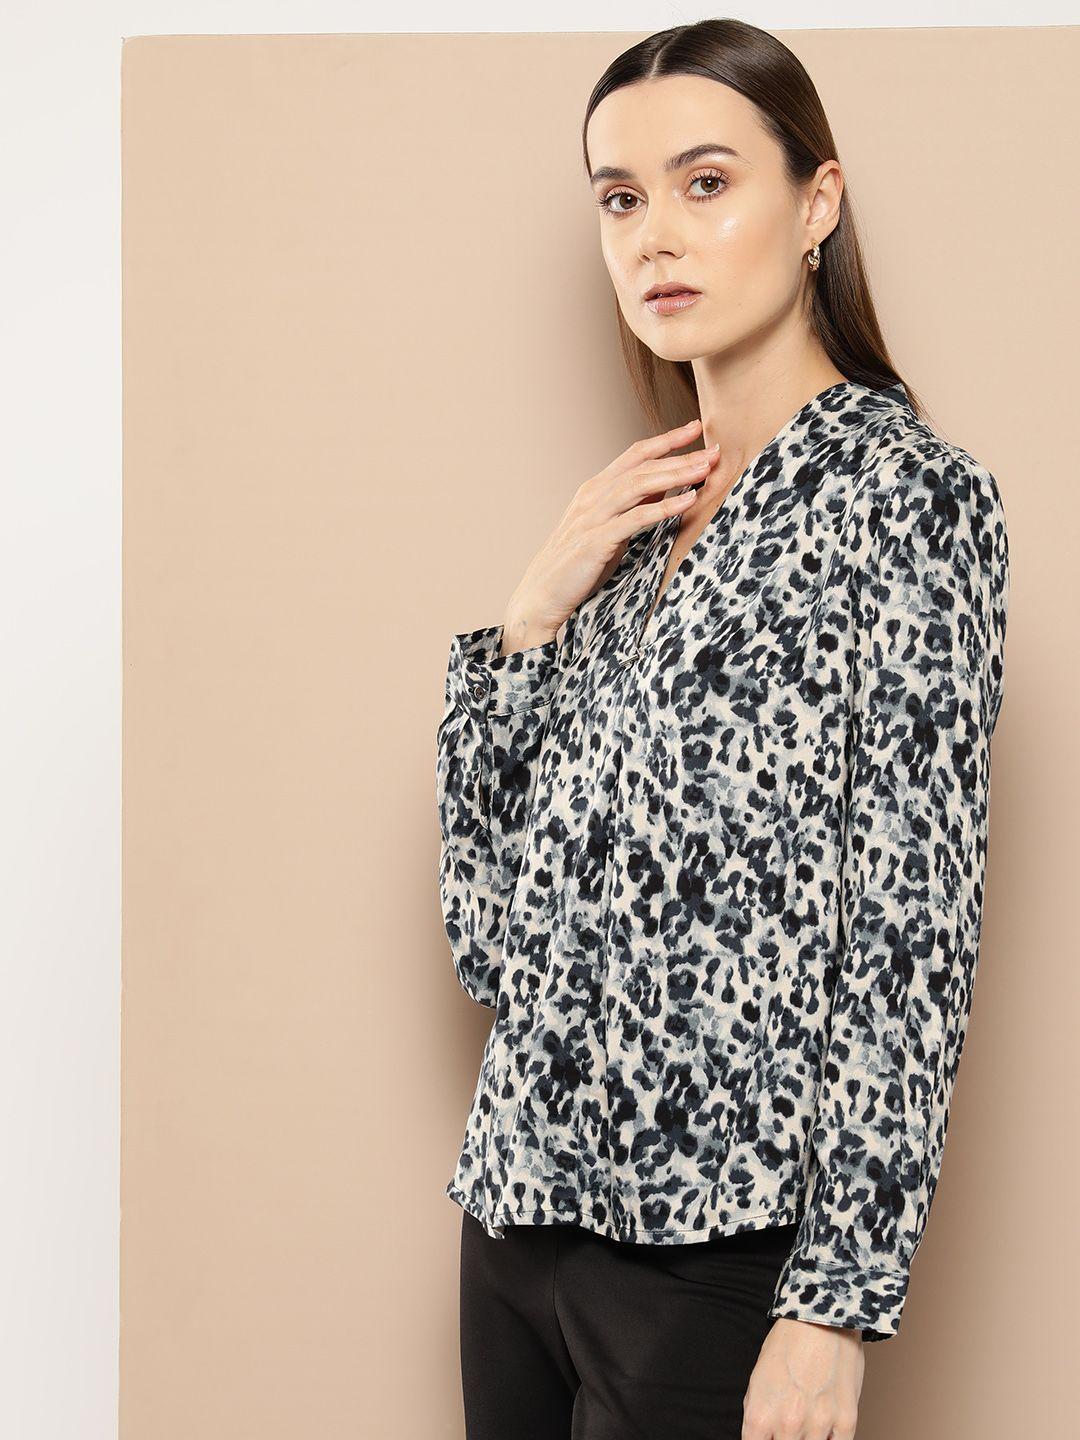 her by invictus animal print top